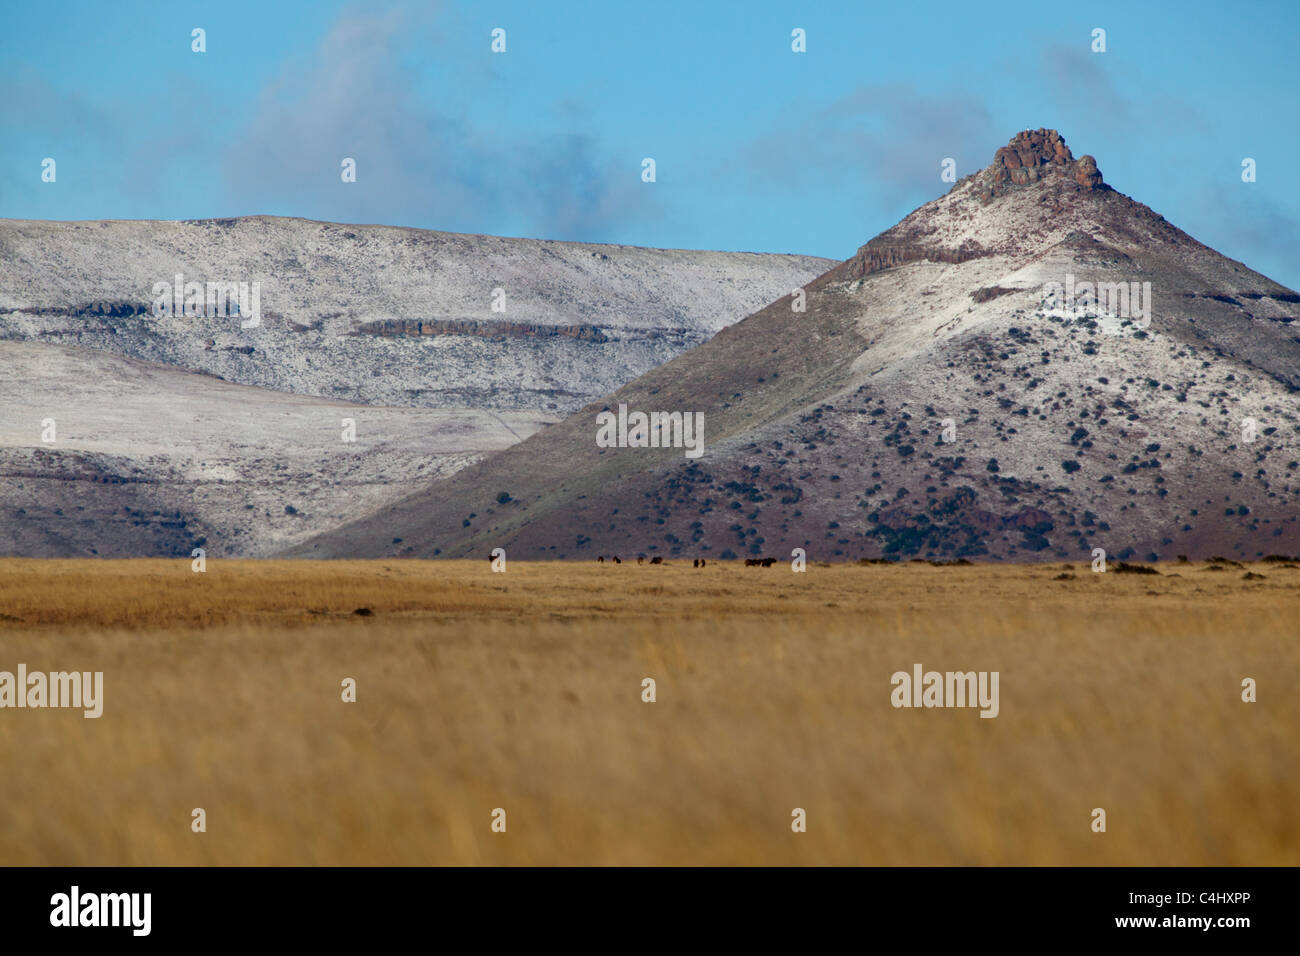 Snow Capped Mountain in Mountain Zebra National Park, South Africa Stock Photo